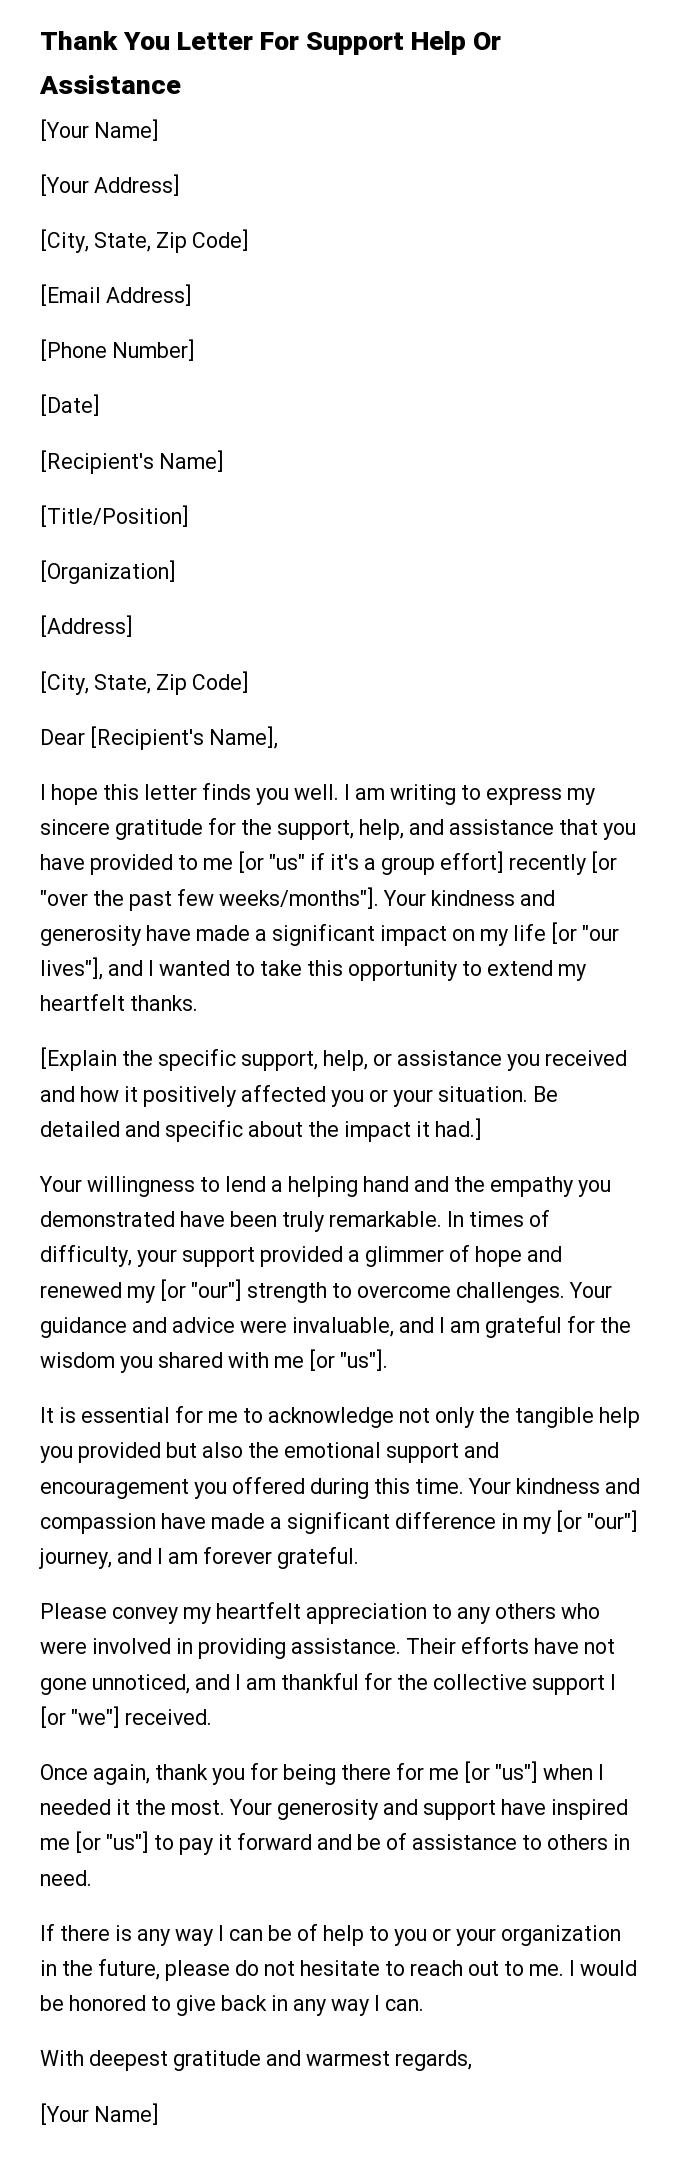 Thank You Letter For Support Help Or Assistance